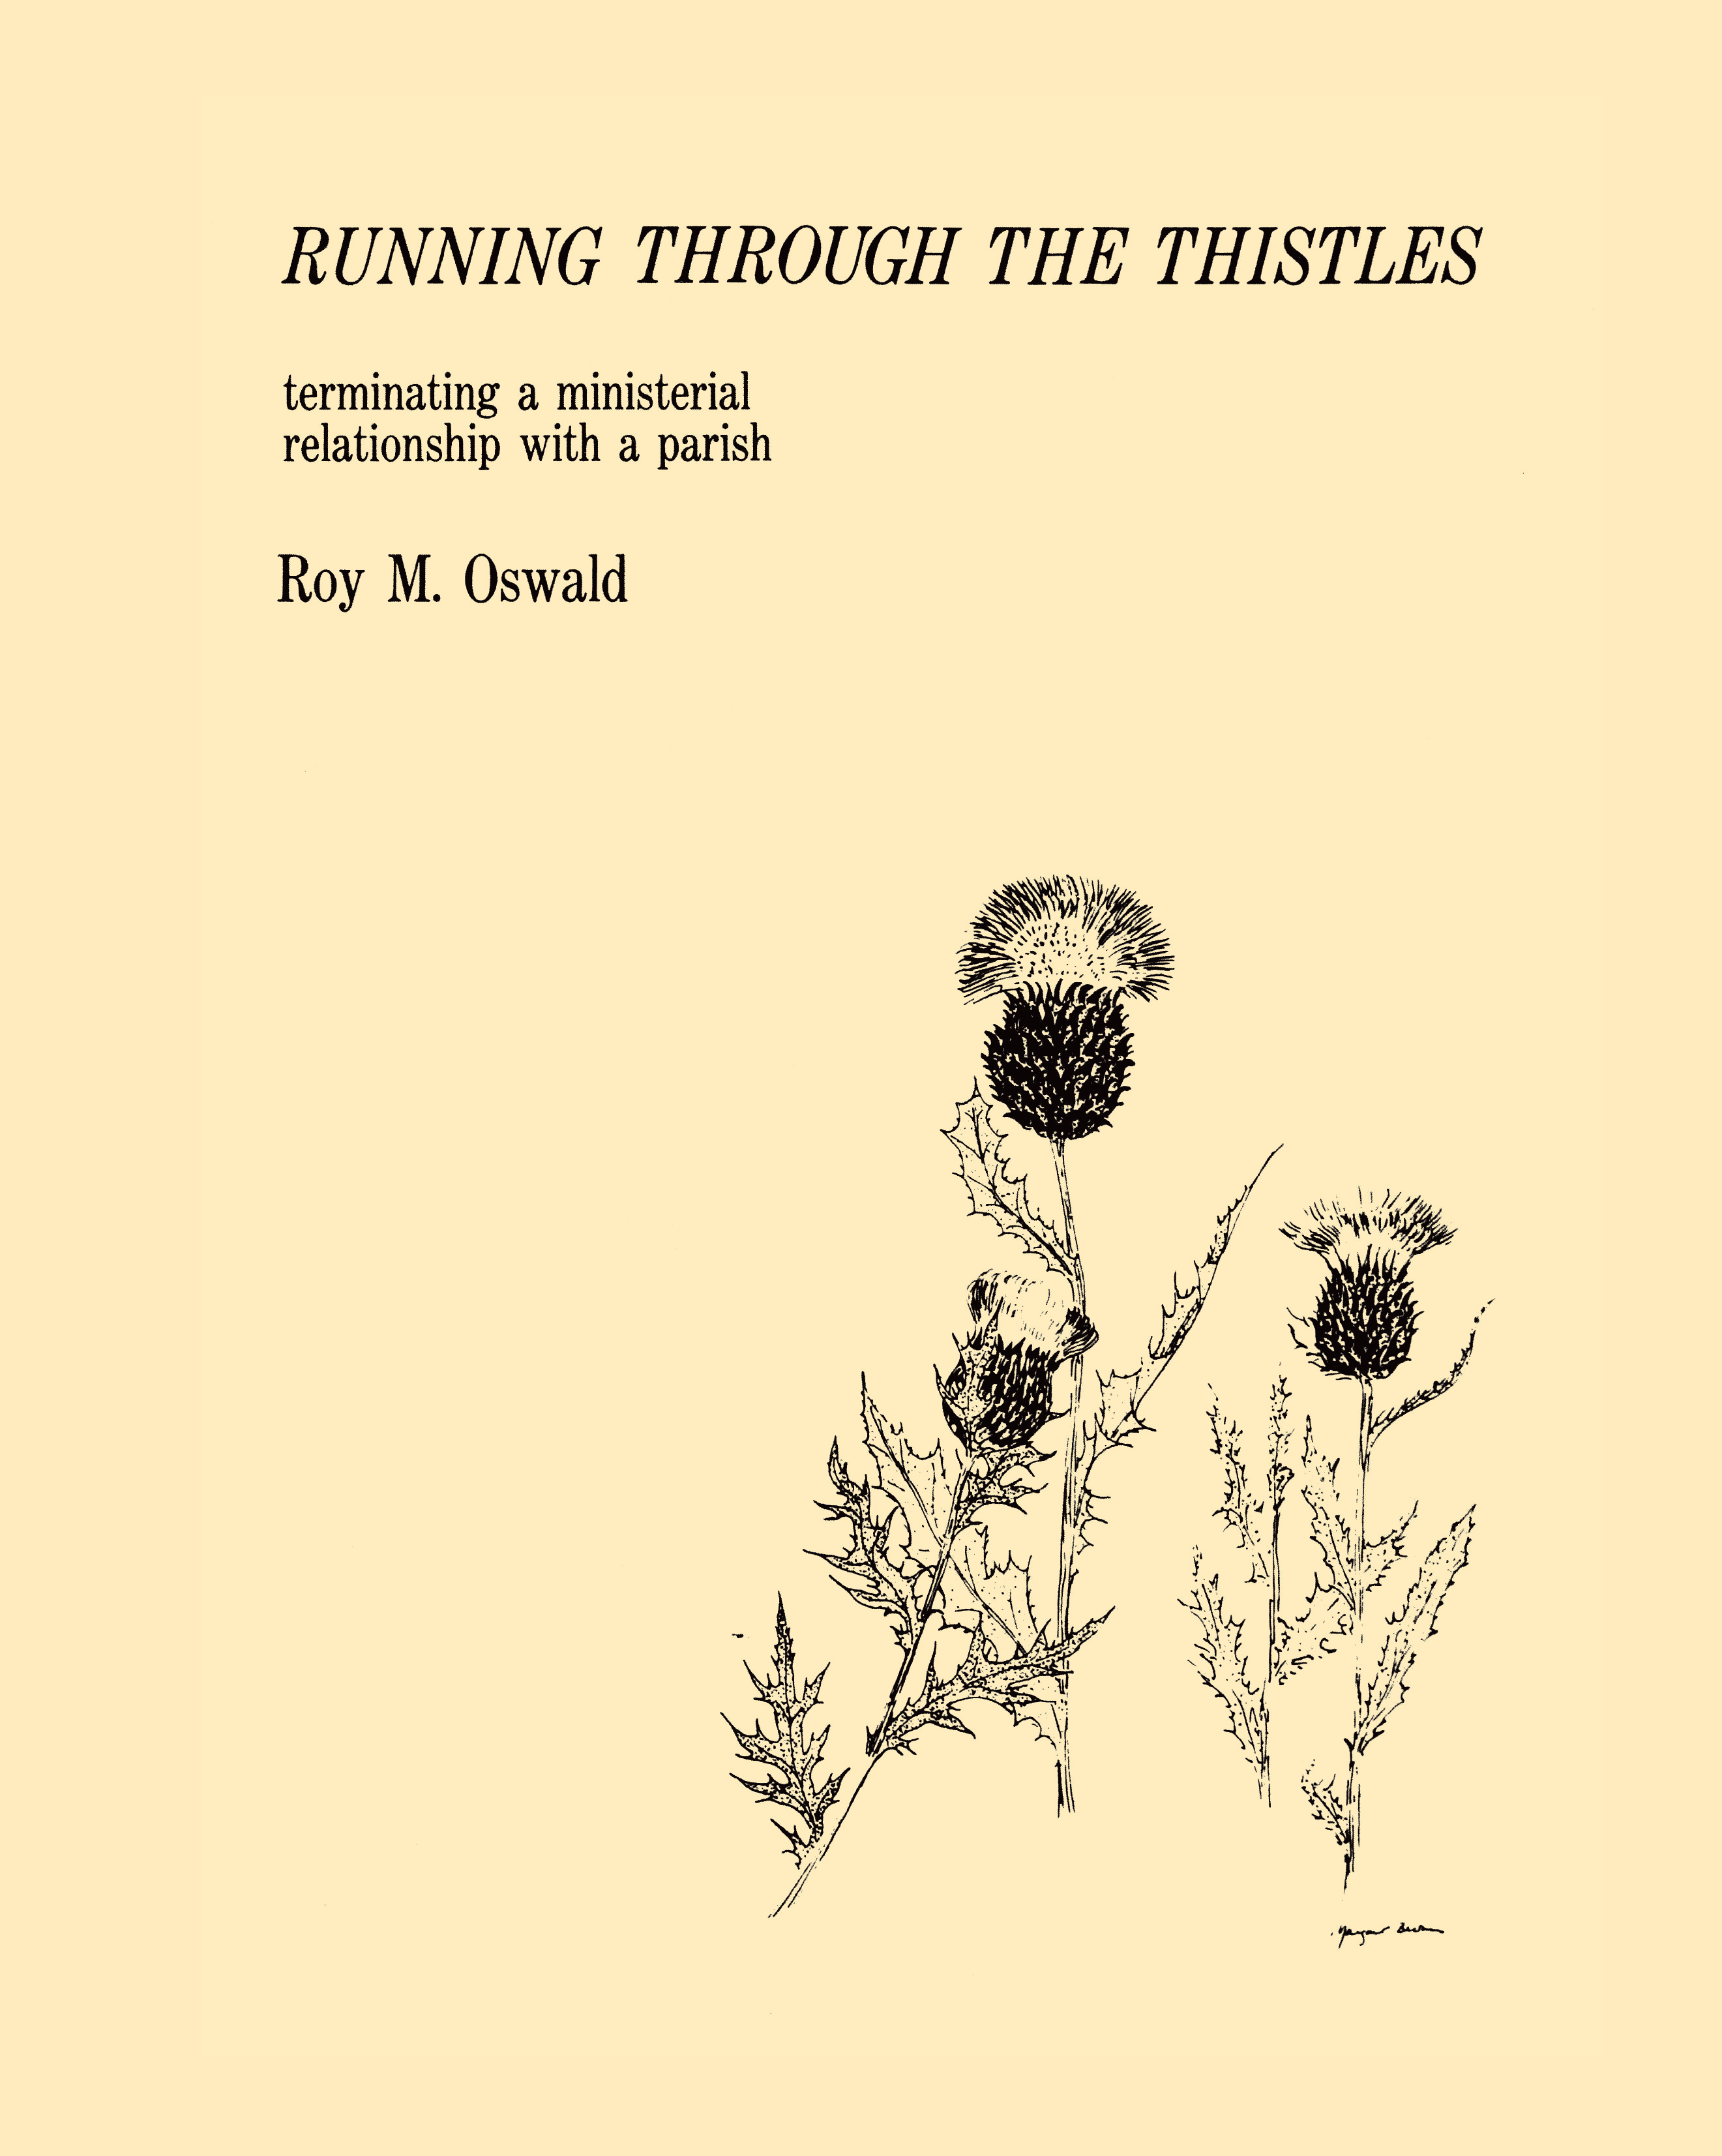 Running Through the Thistles: Terminating a Ministerial Relationship with a Parish